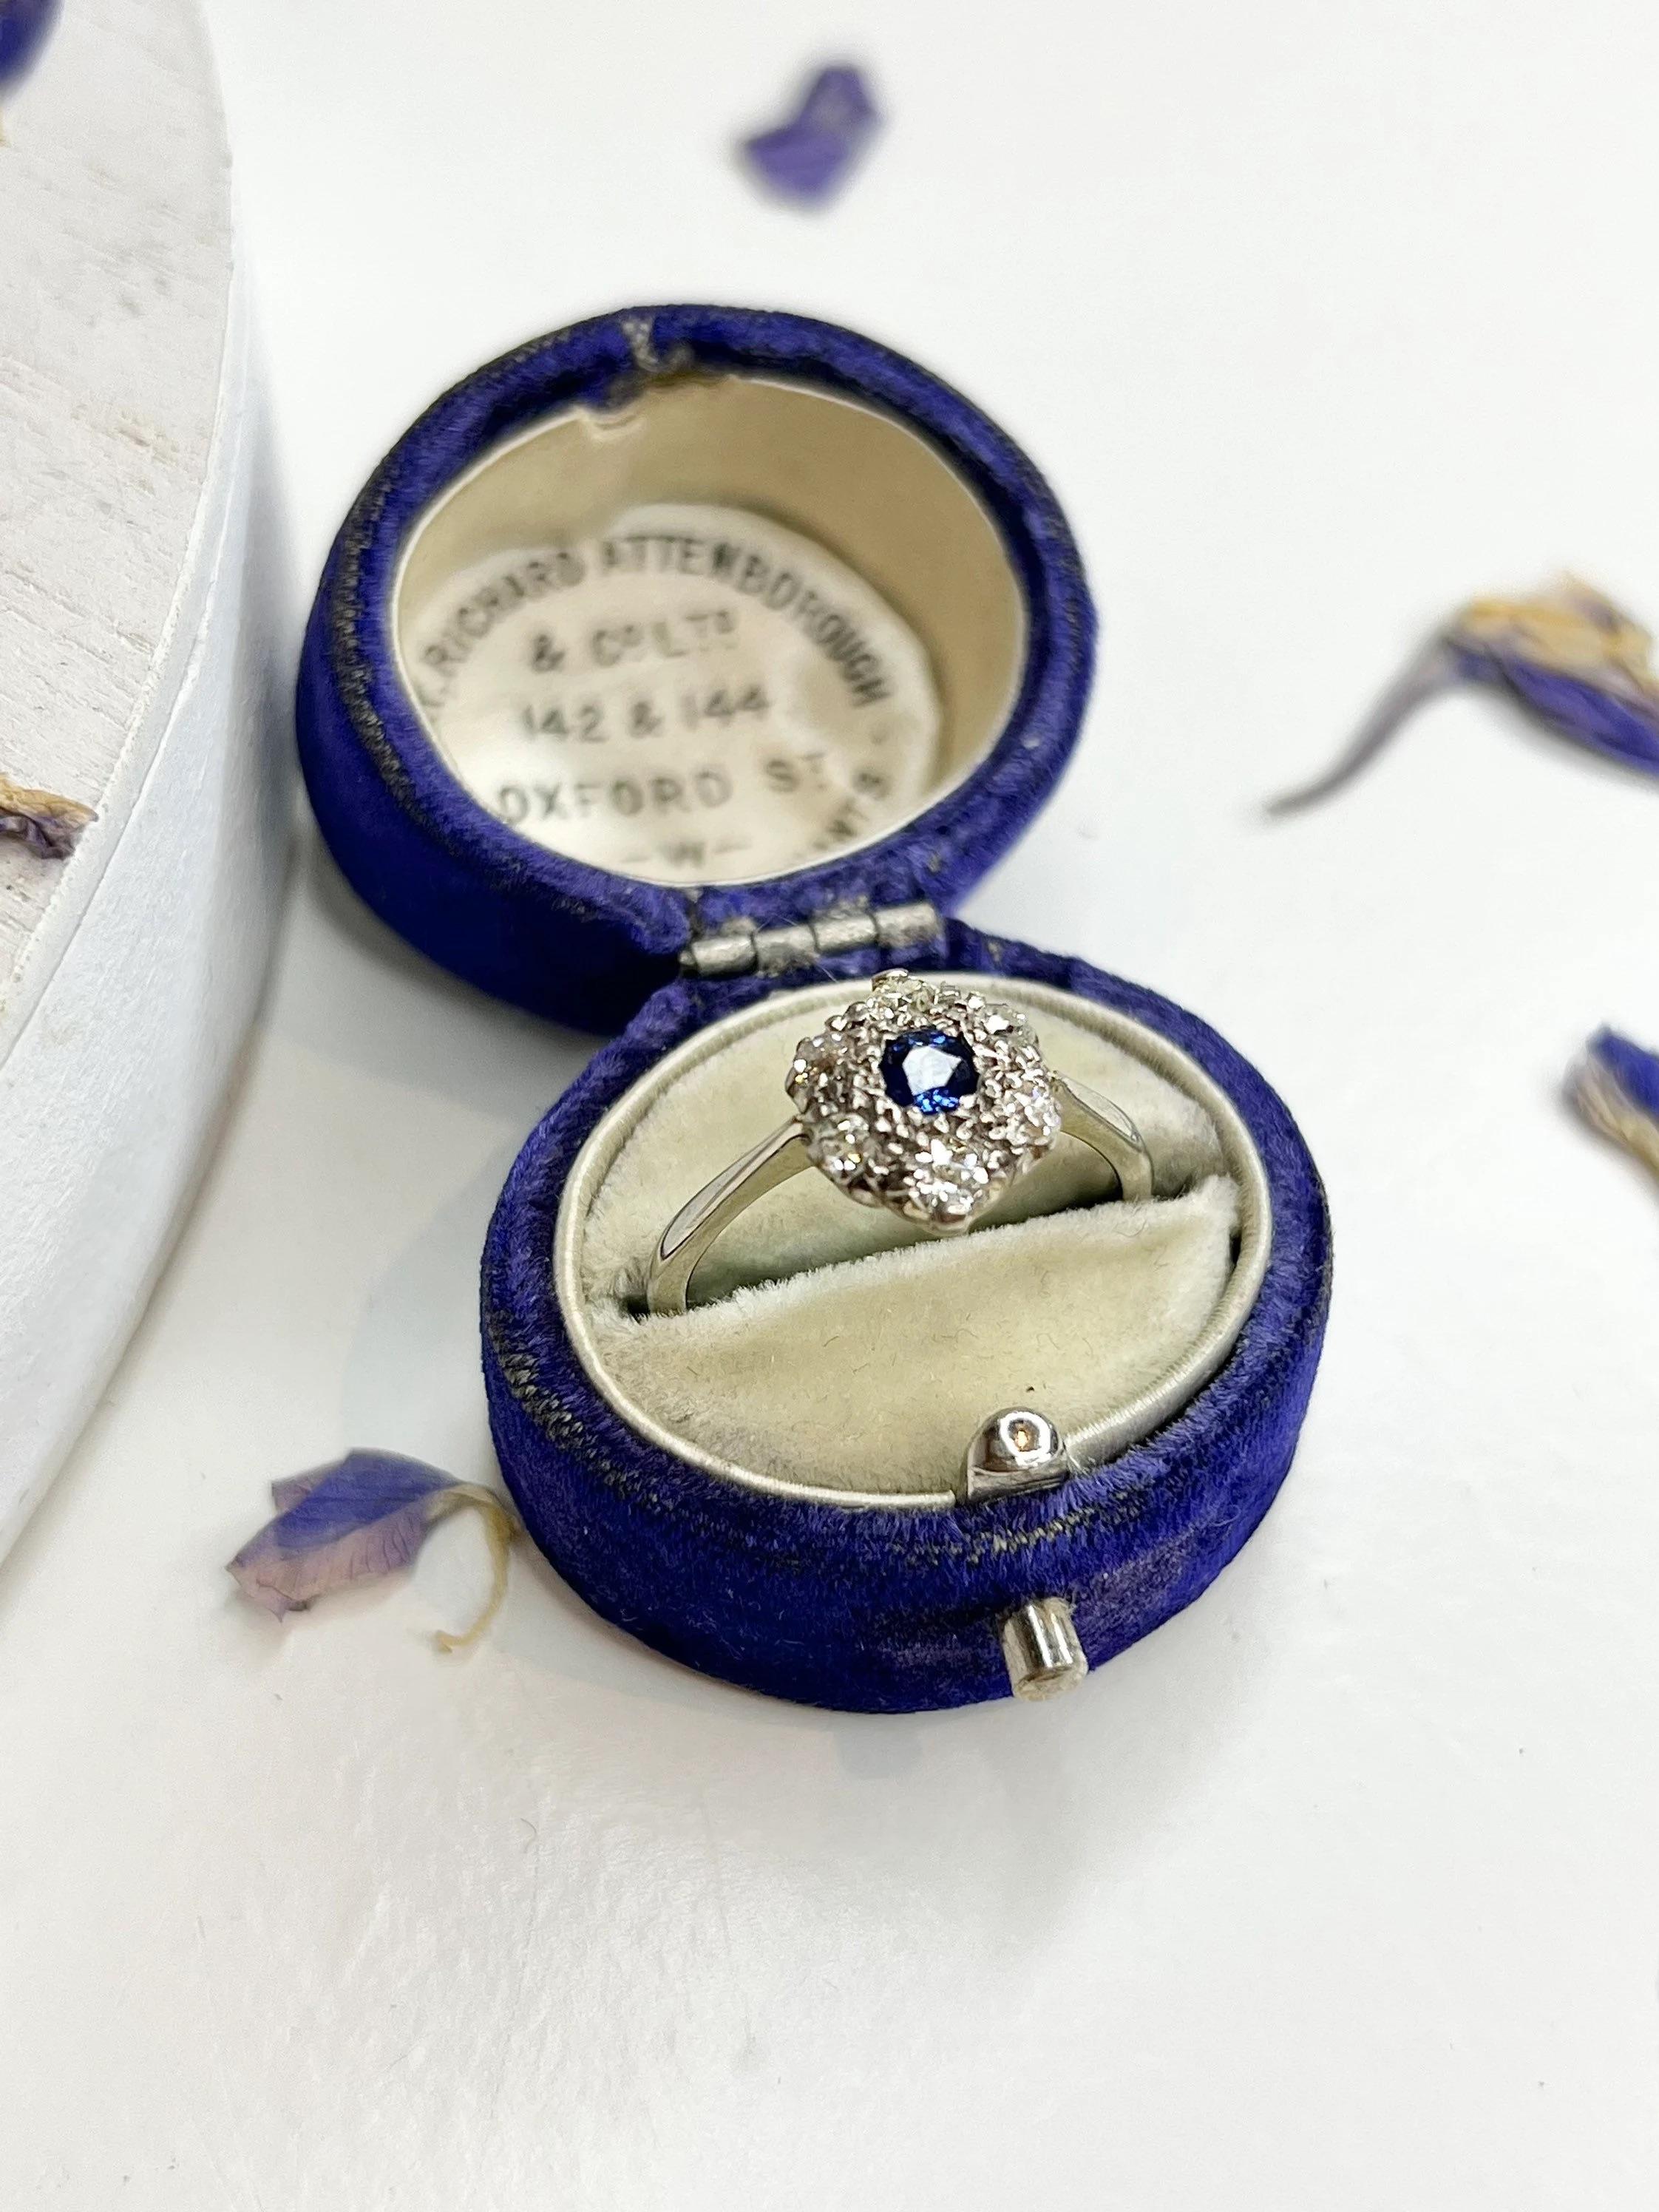 Vintage Daisy Ring 

Circa 1940’s

18ct White Gold 

Beautiful Daisy Style Ring Set with Natural Centre Sapphire & Cluster of Old Cut Diamonds 

Face of the ring measures 10.8mm x 10mm

Would make a lovely engagement ring! 

UK Size N

US Size